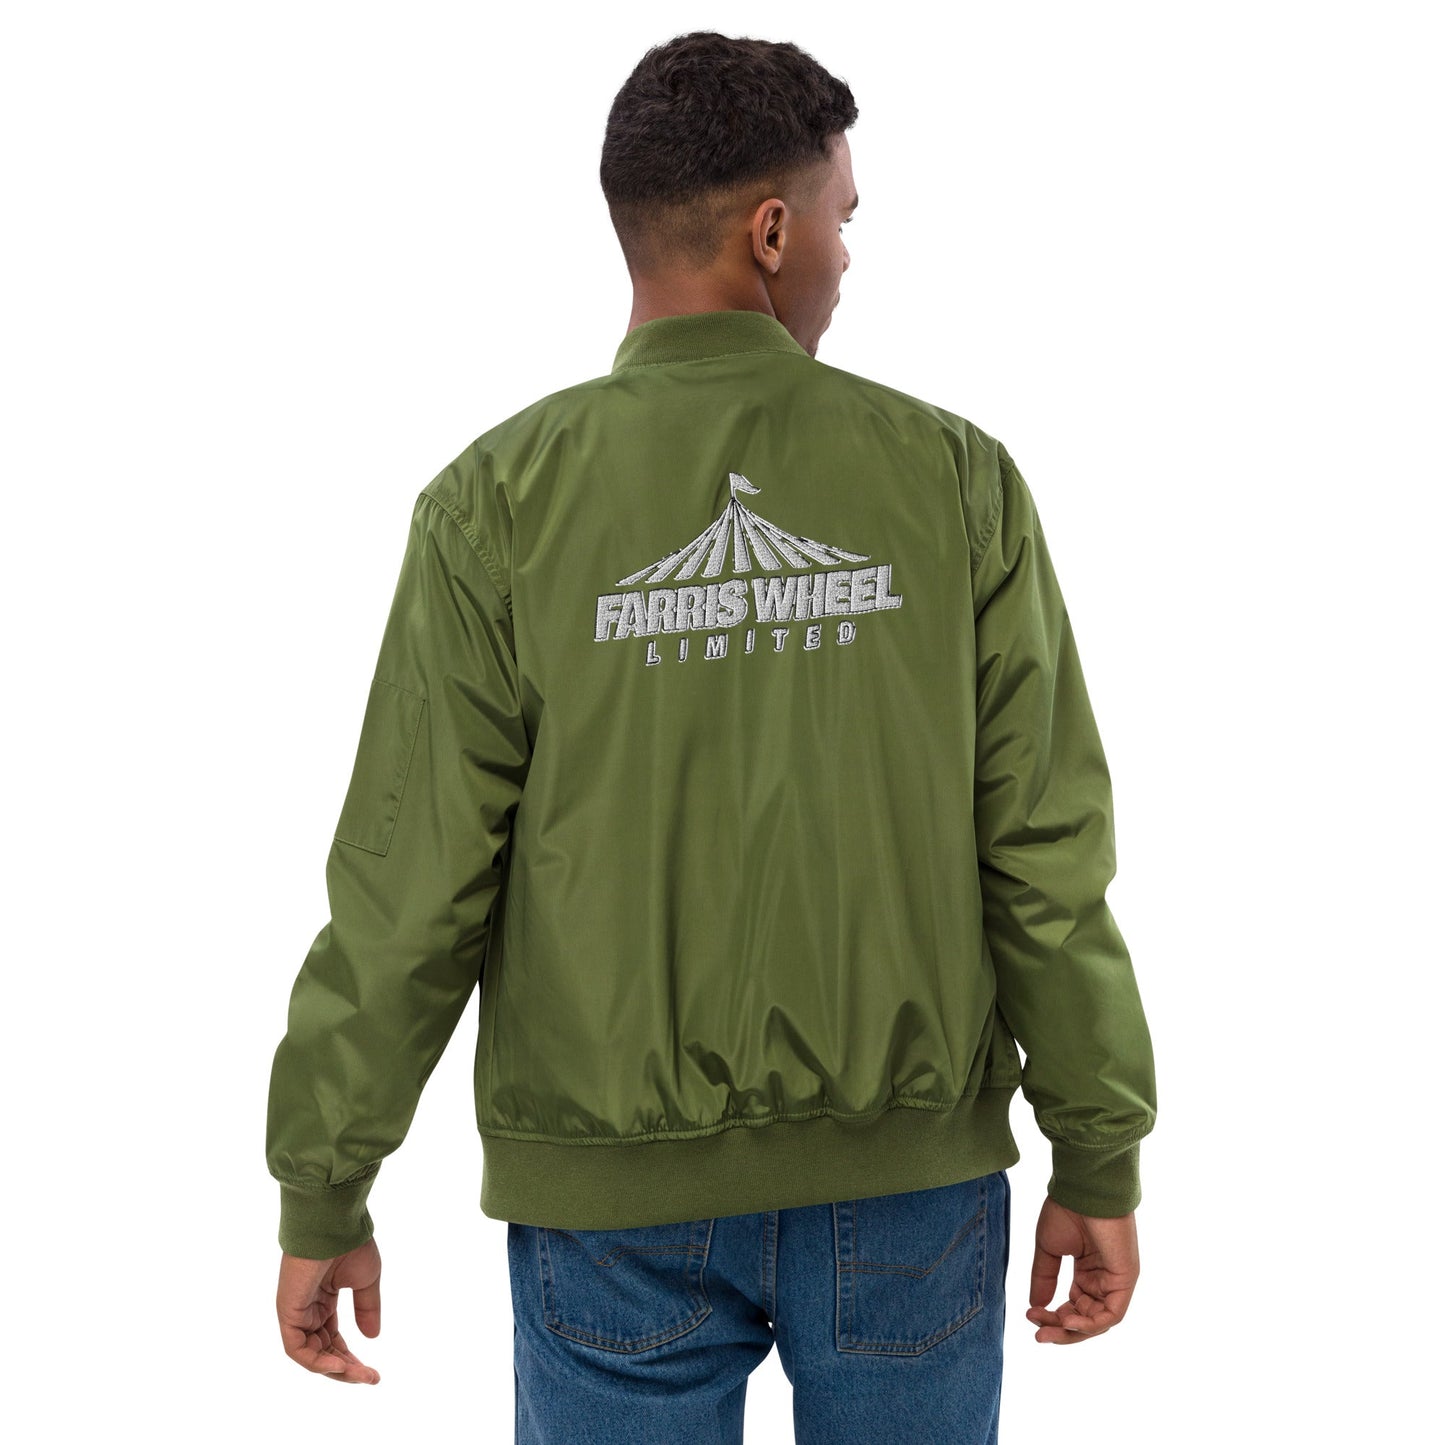 Farris Wheel Limited Premium Bomber Jacket - BeExtra! Apparel & More